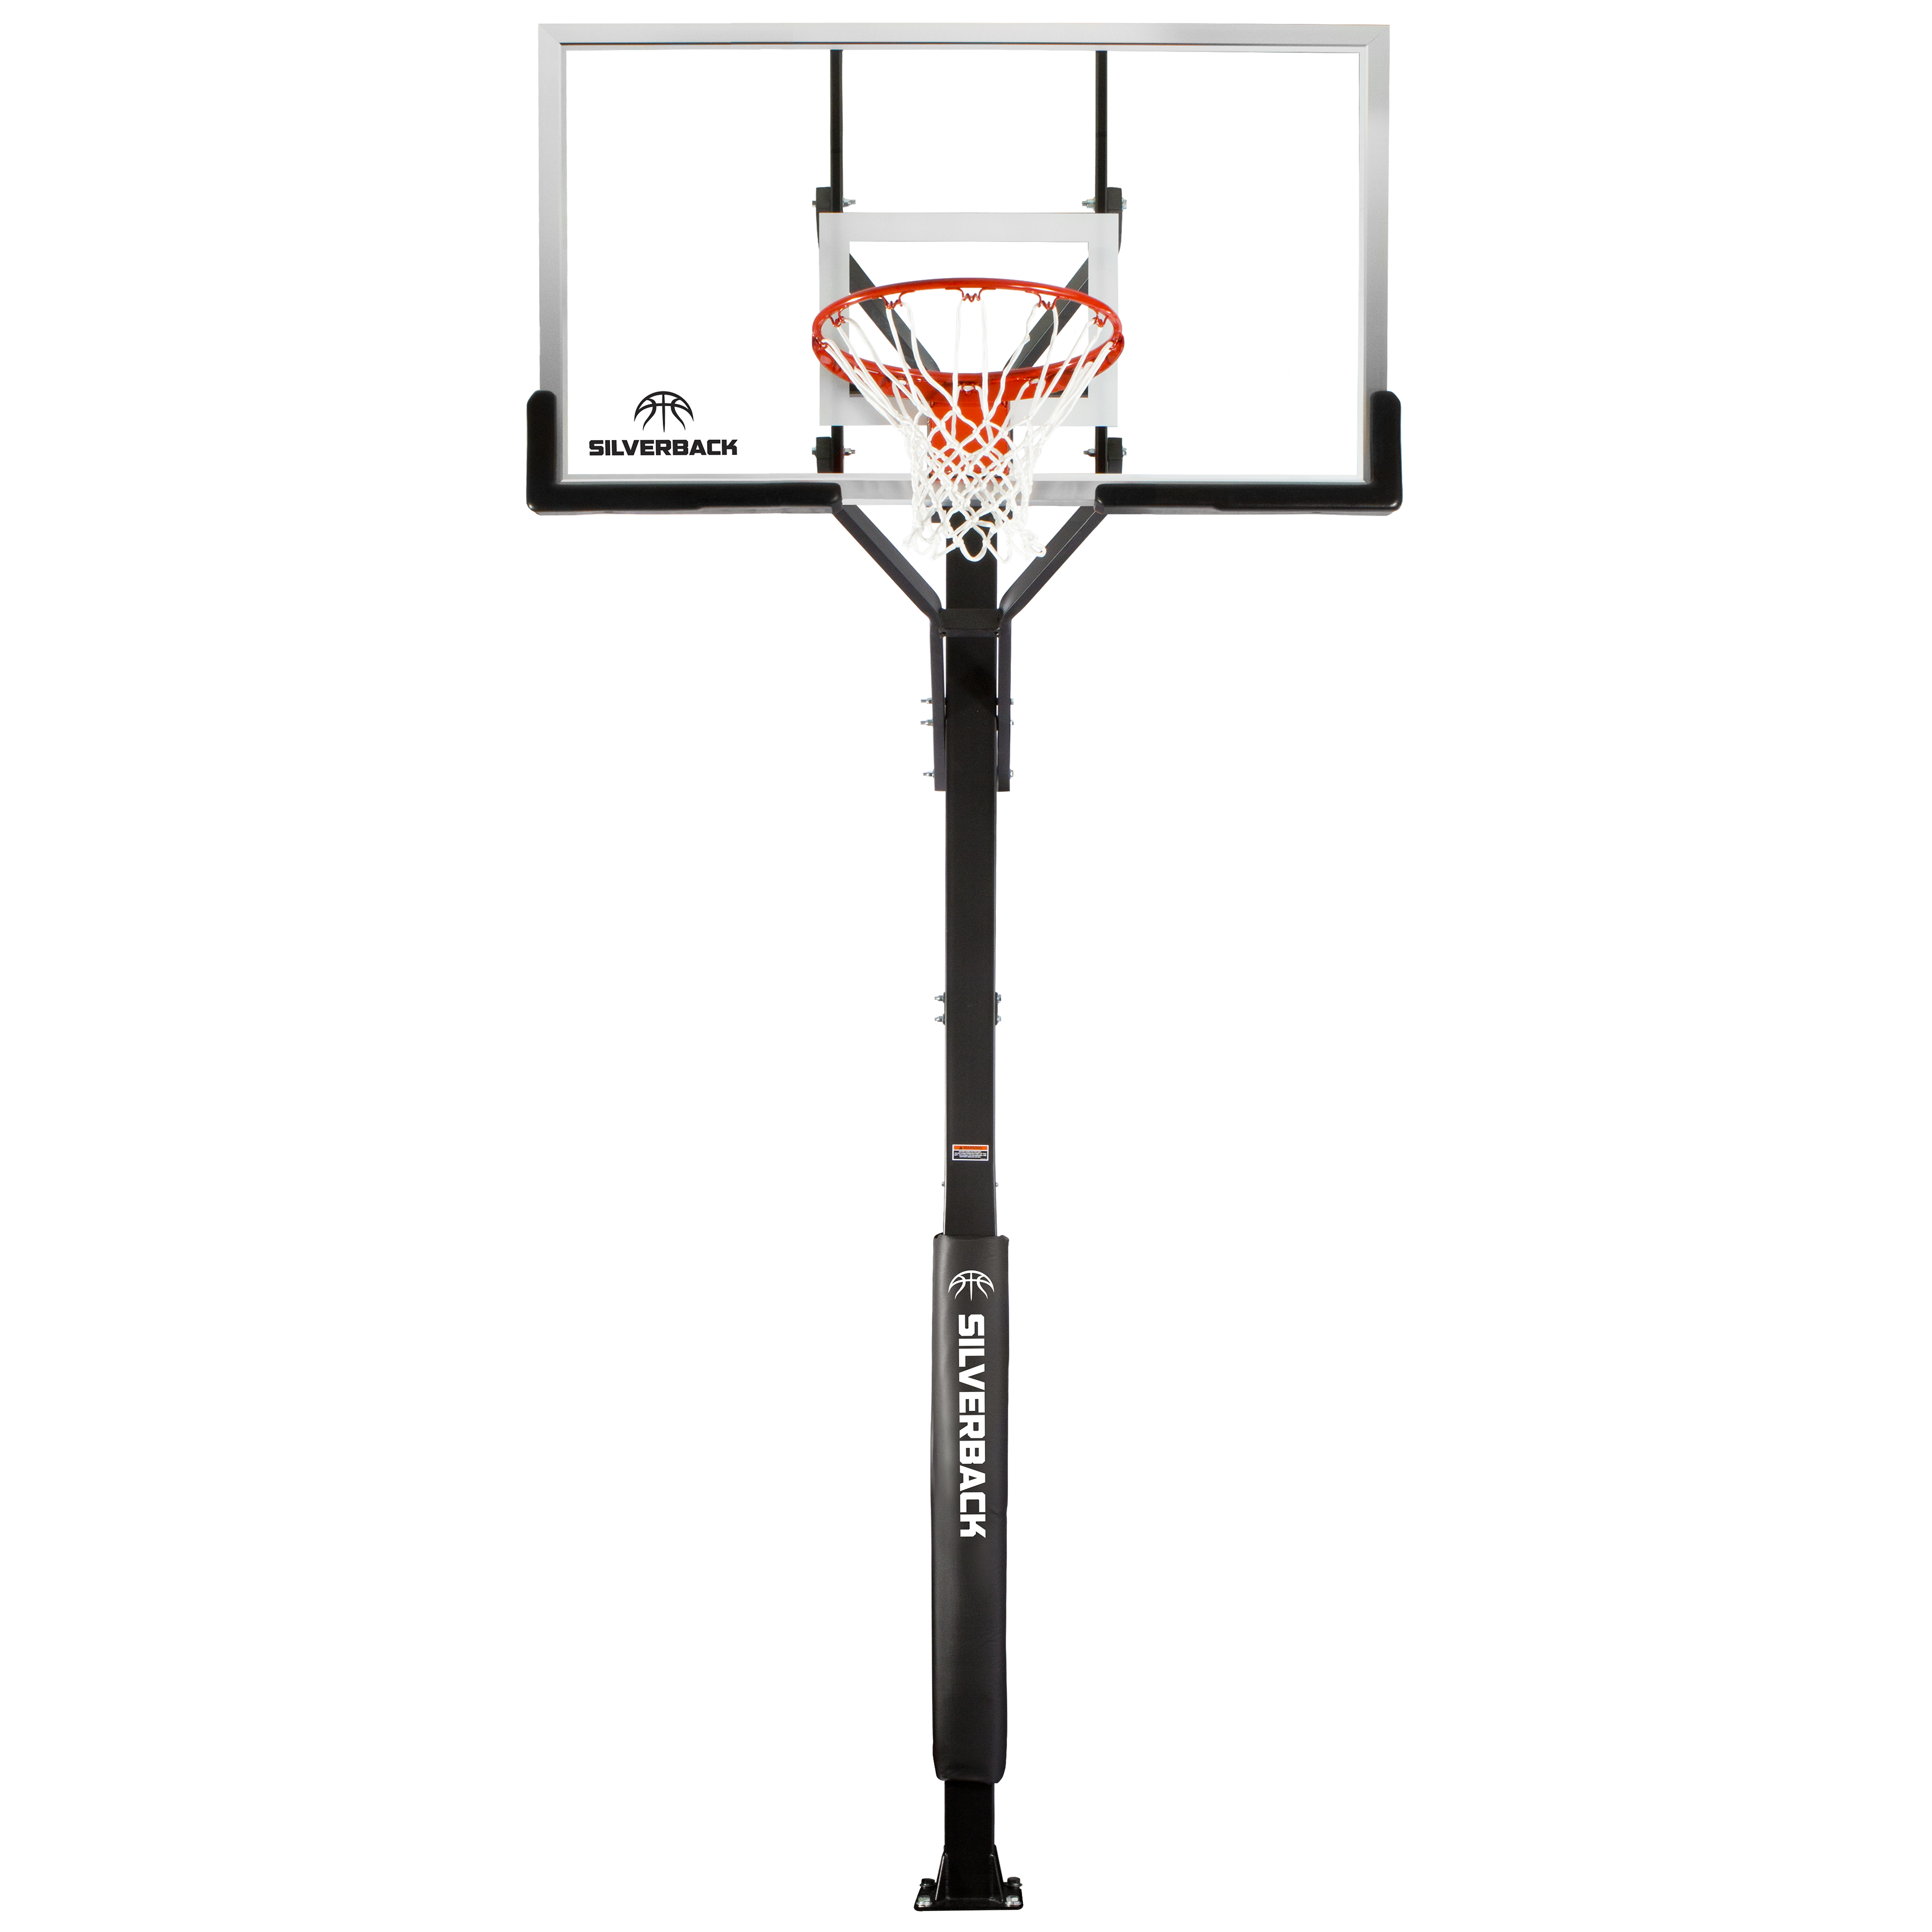 Silverback 60" In-Ground Basketball System with Adjustable-Height Tempered Glass Backboard and Pro-Style Breakaway Rim - image 3 of 23